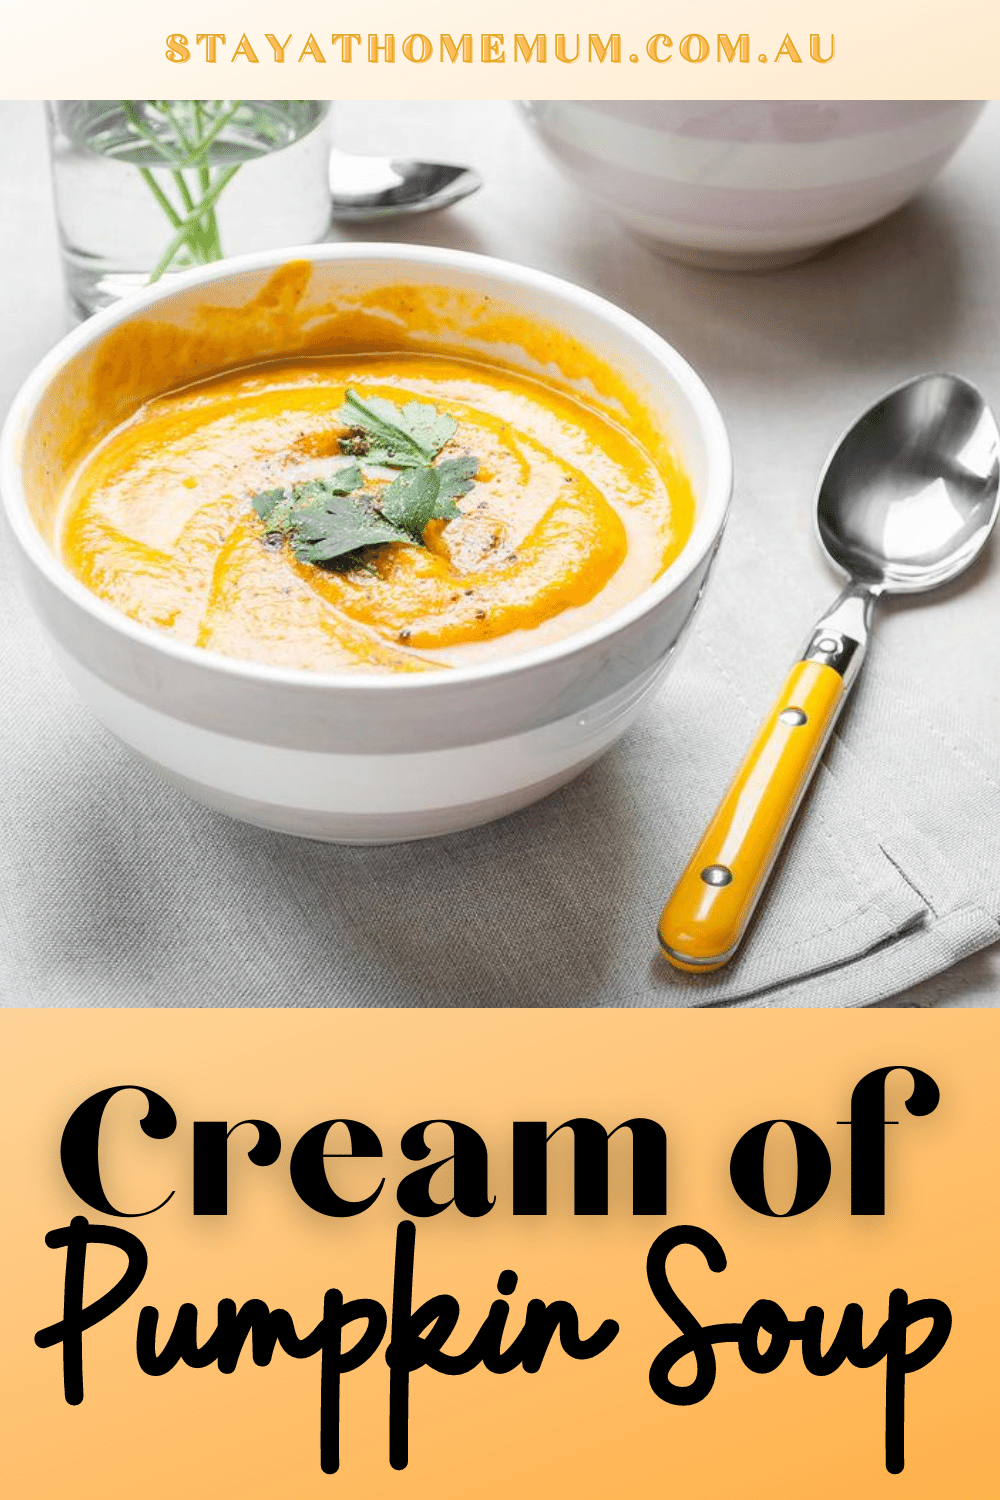 Cream of Pumpkin Soup | Stay At Home Mum